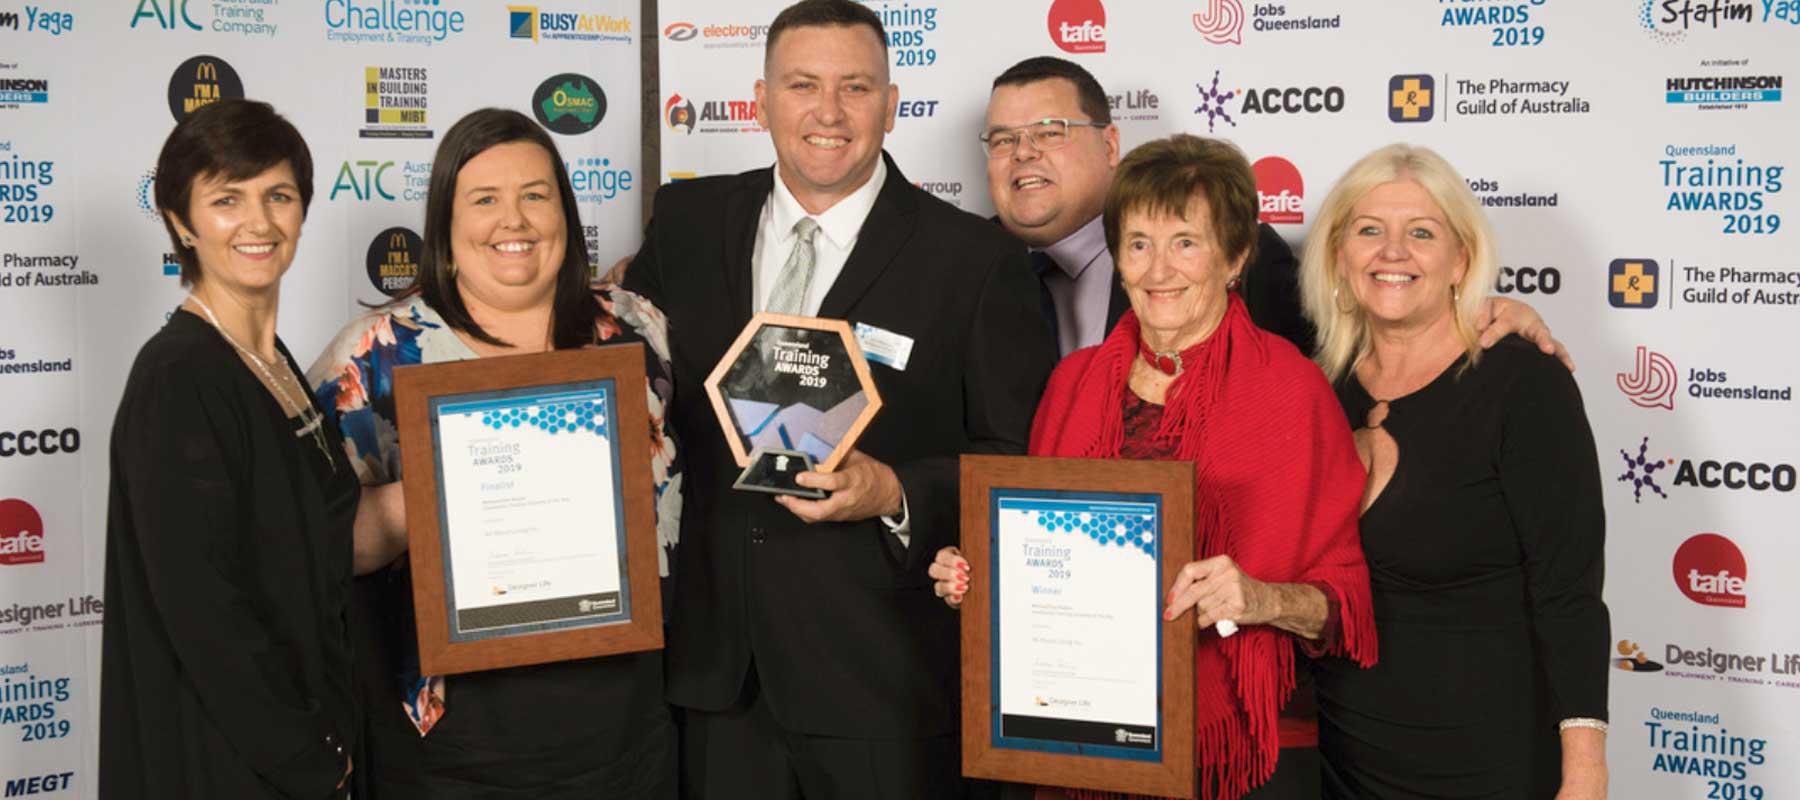 Six All About Living members formally dressed, taking a photo holding three Training Awards 2019 awards. Standing in front of a wall of brands including The Pharmacy Guild of Australia, Jobs Queensland, Tafe, MEGT, ACCCO